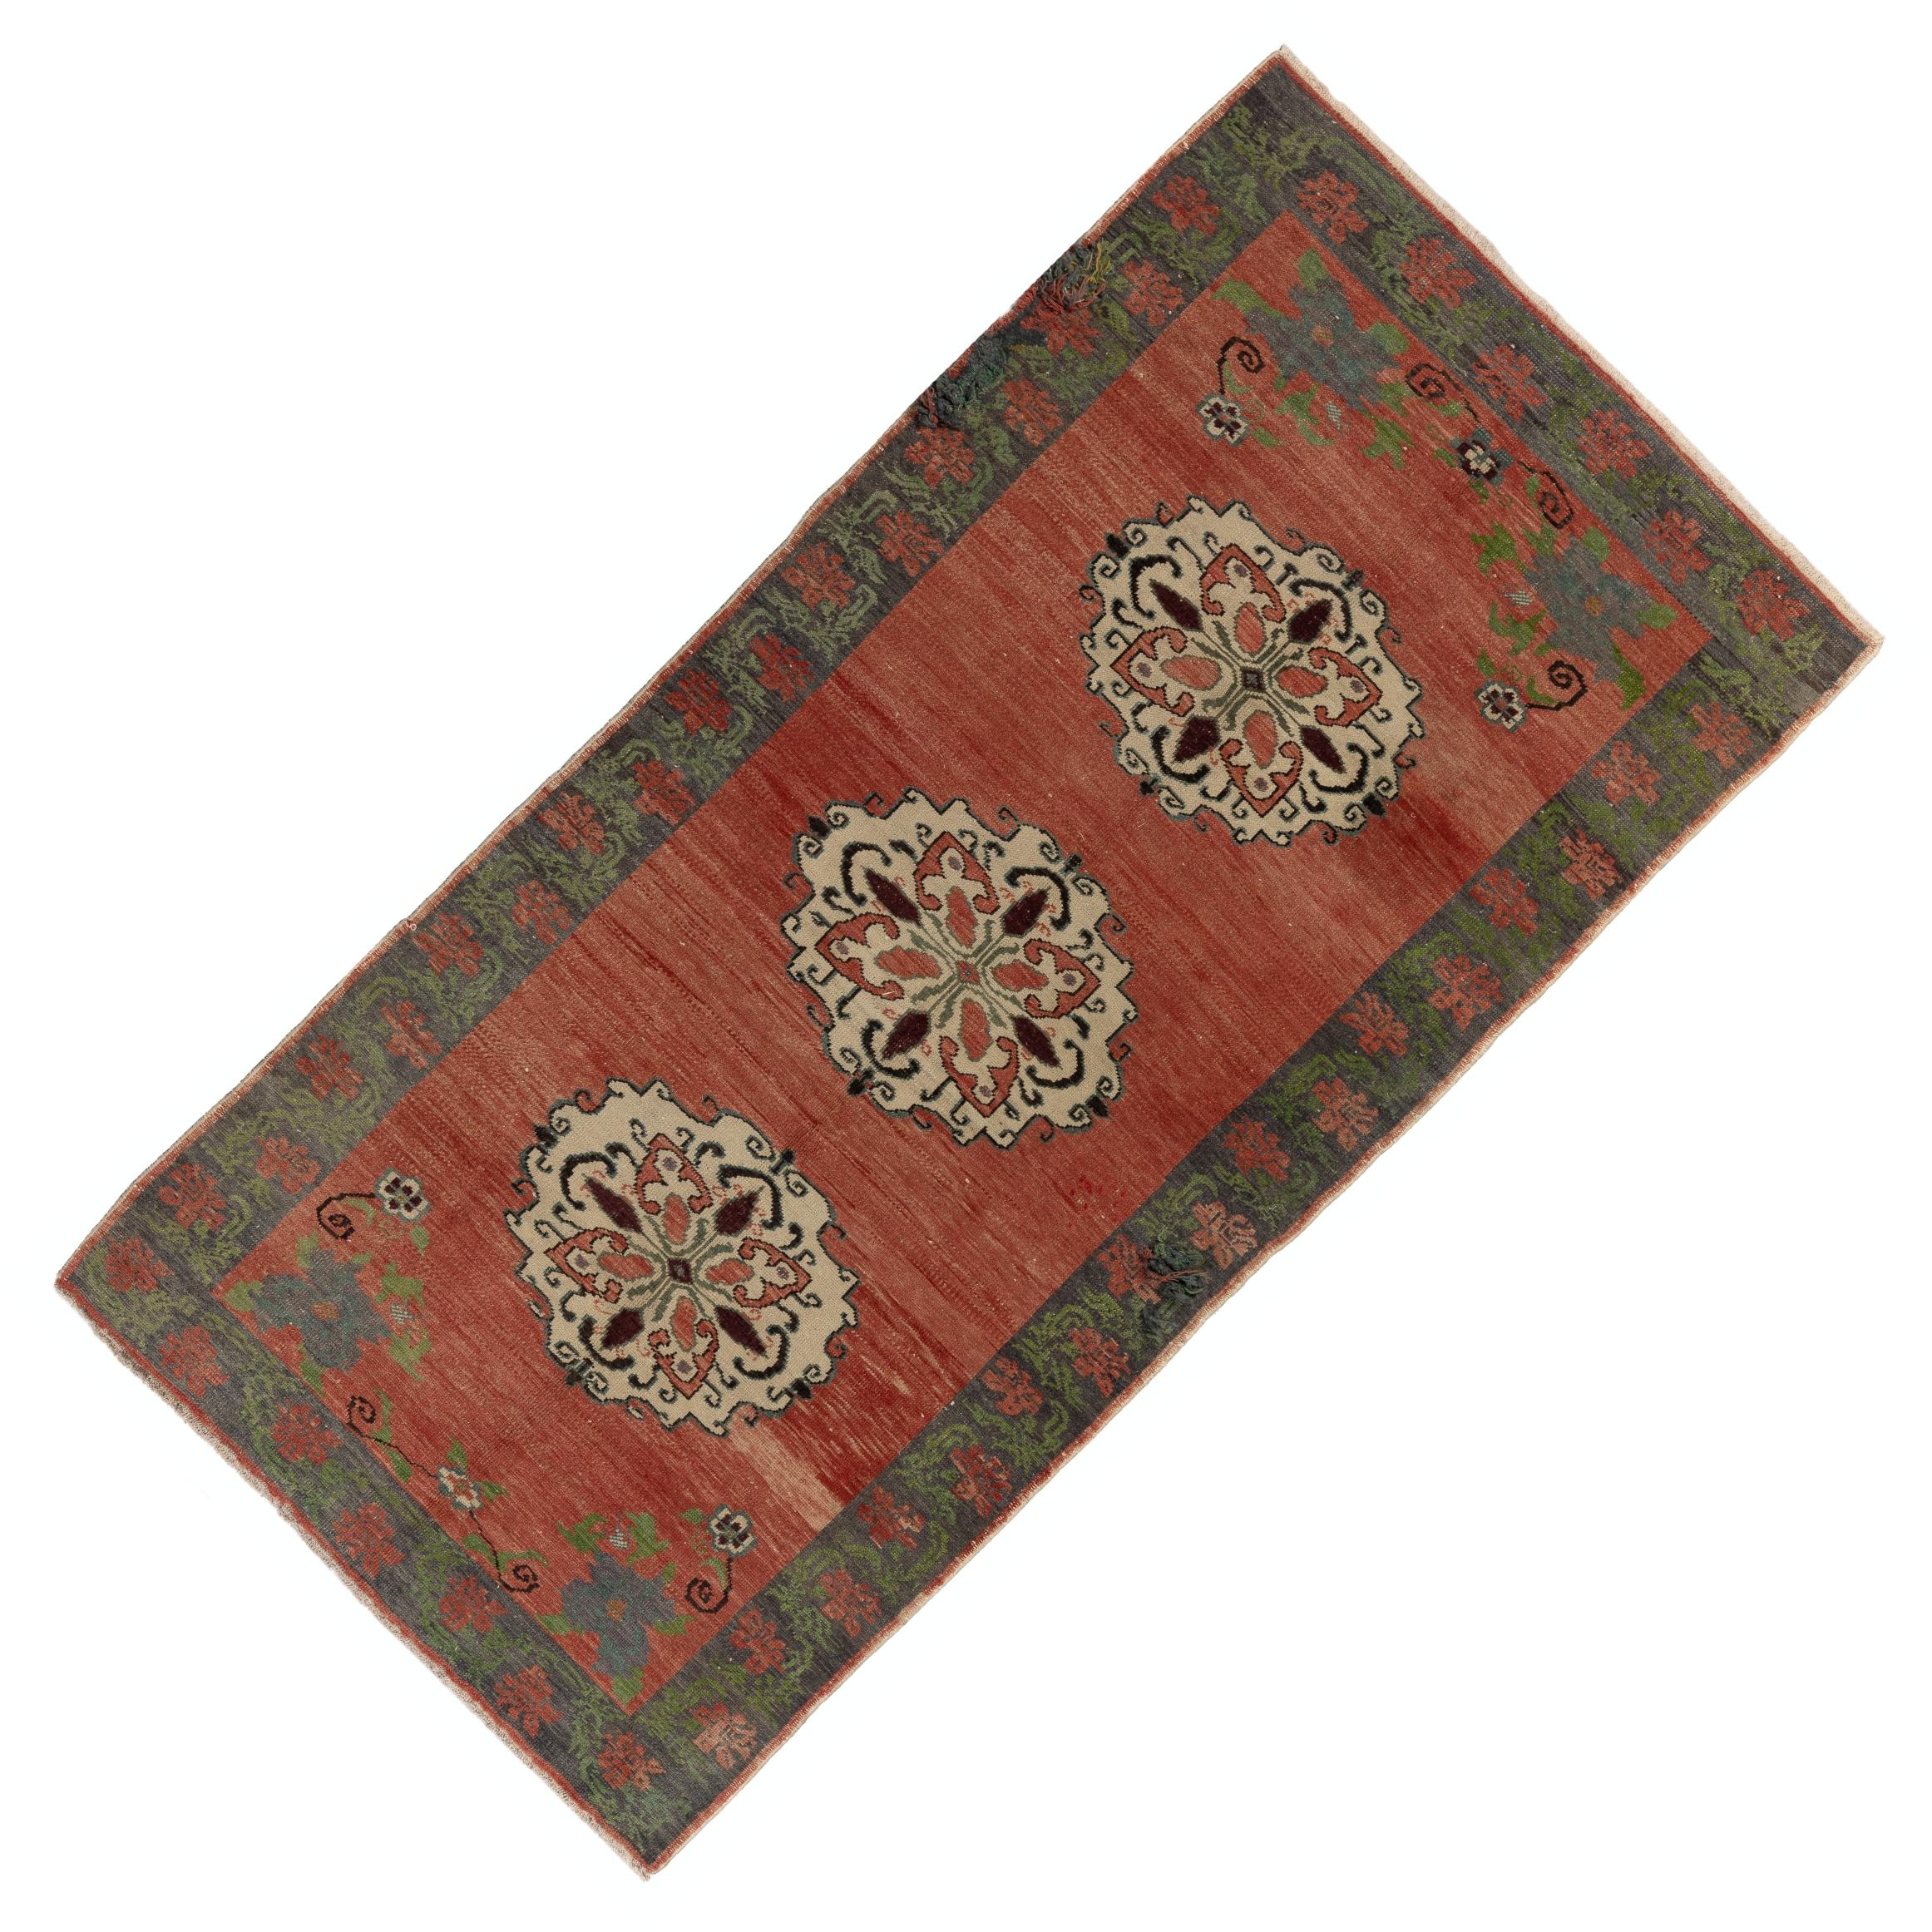 Hand-Knotted 3.7x12.5 Ft Vintage Turkish Karapinar Wool Runner Rug in Red, Green, Beige, Grey For Sale